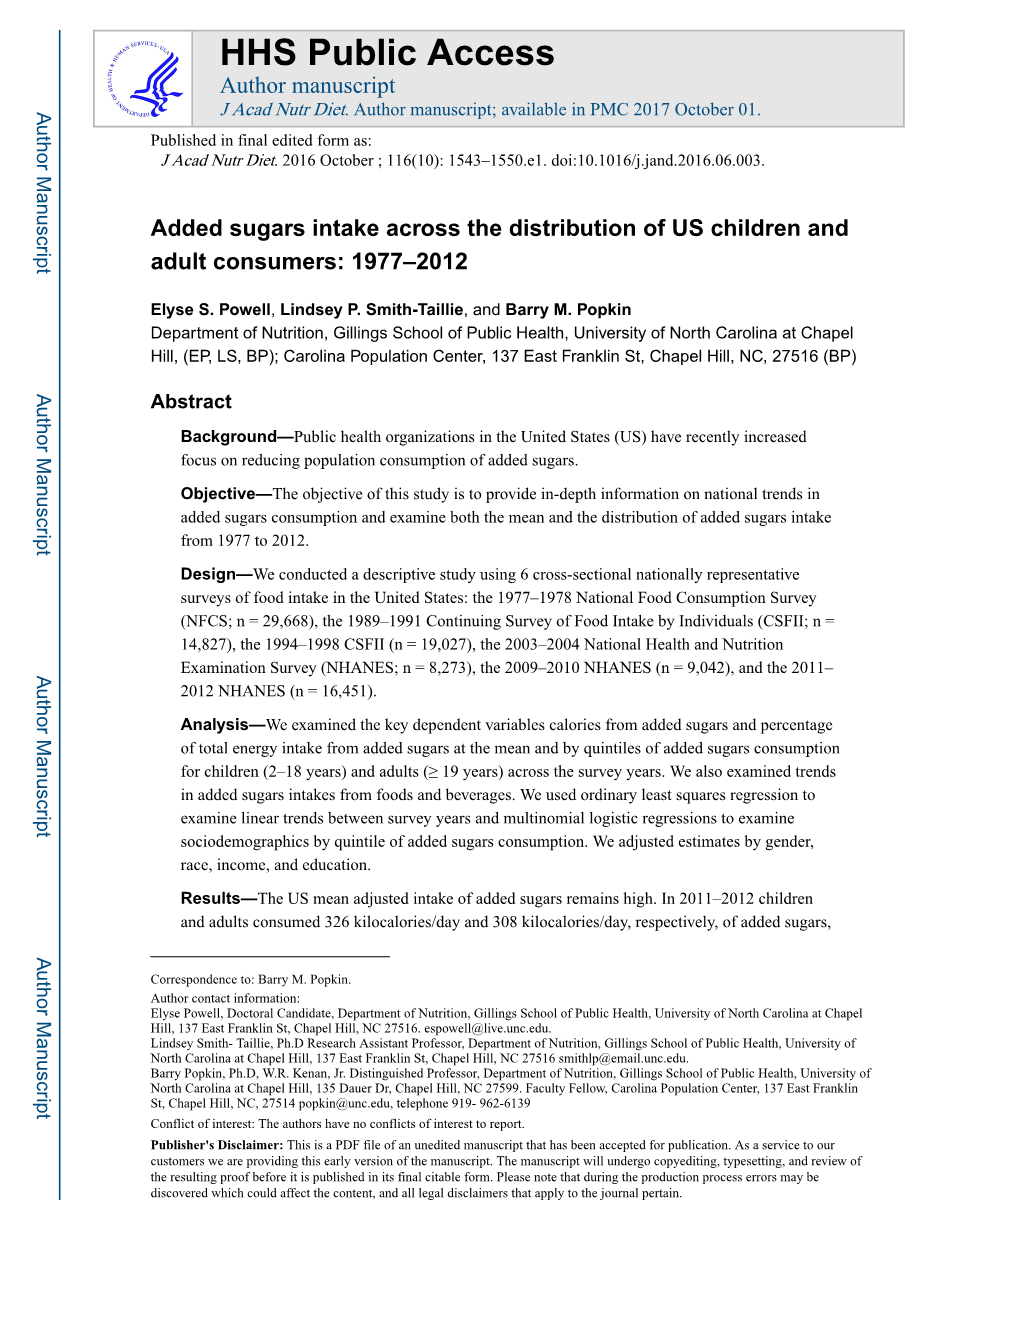 Added Sugars Intake Across the Distribution of US Children and Adult Consumers: 1977–2012